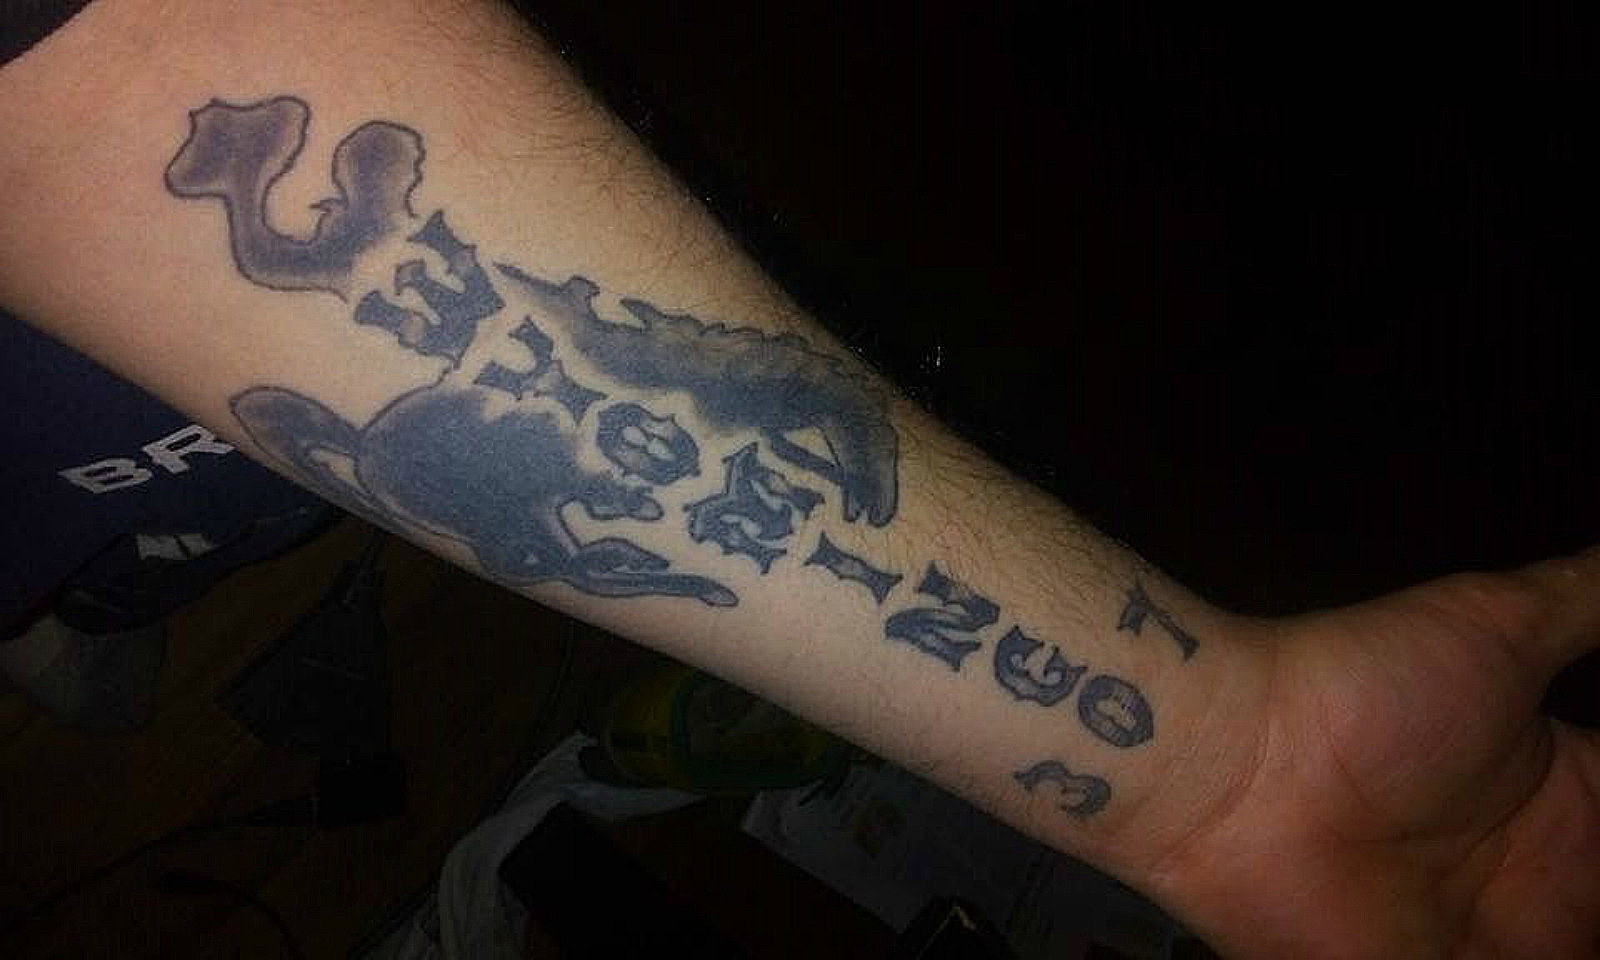 The Most Popular Tattoo in Wyoming